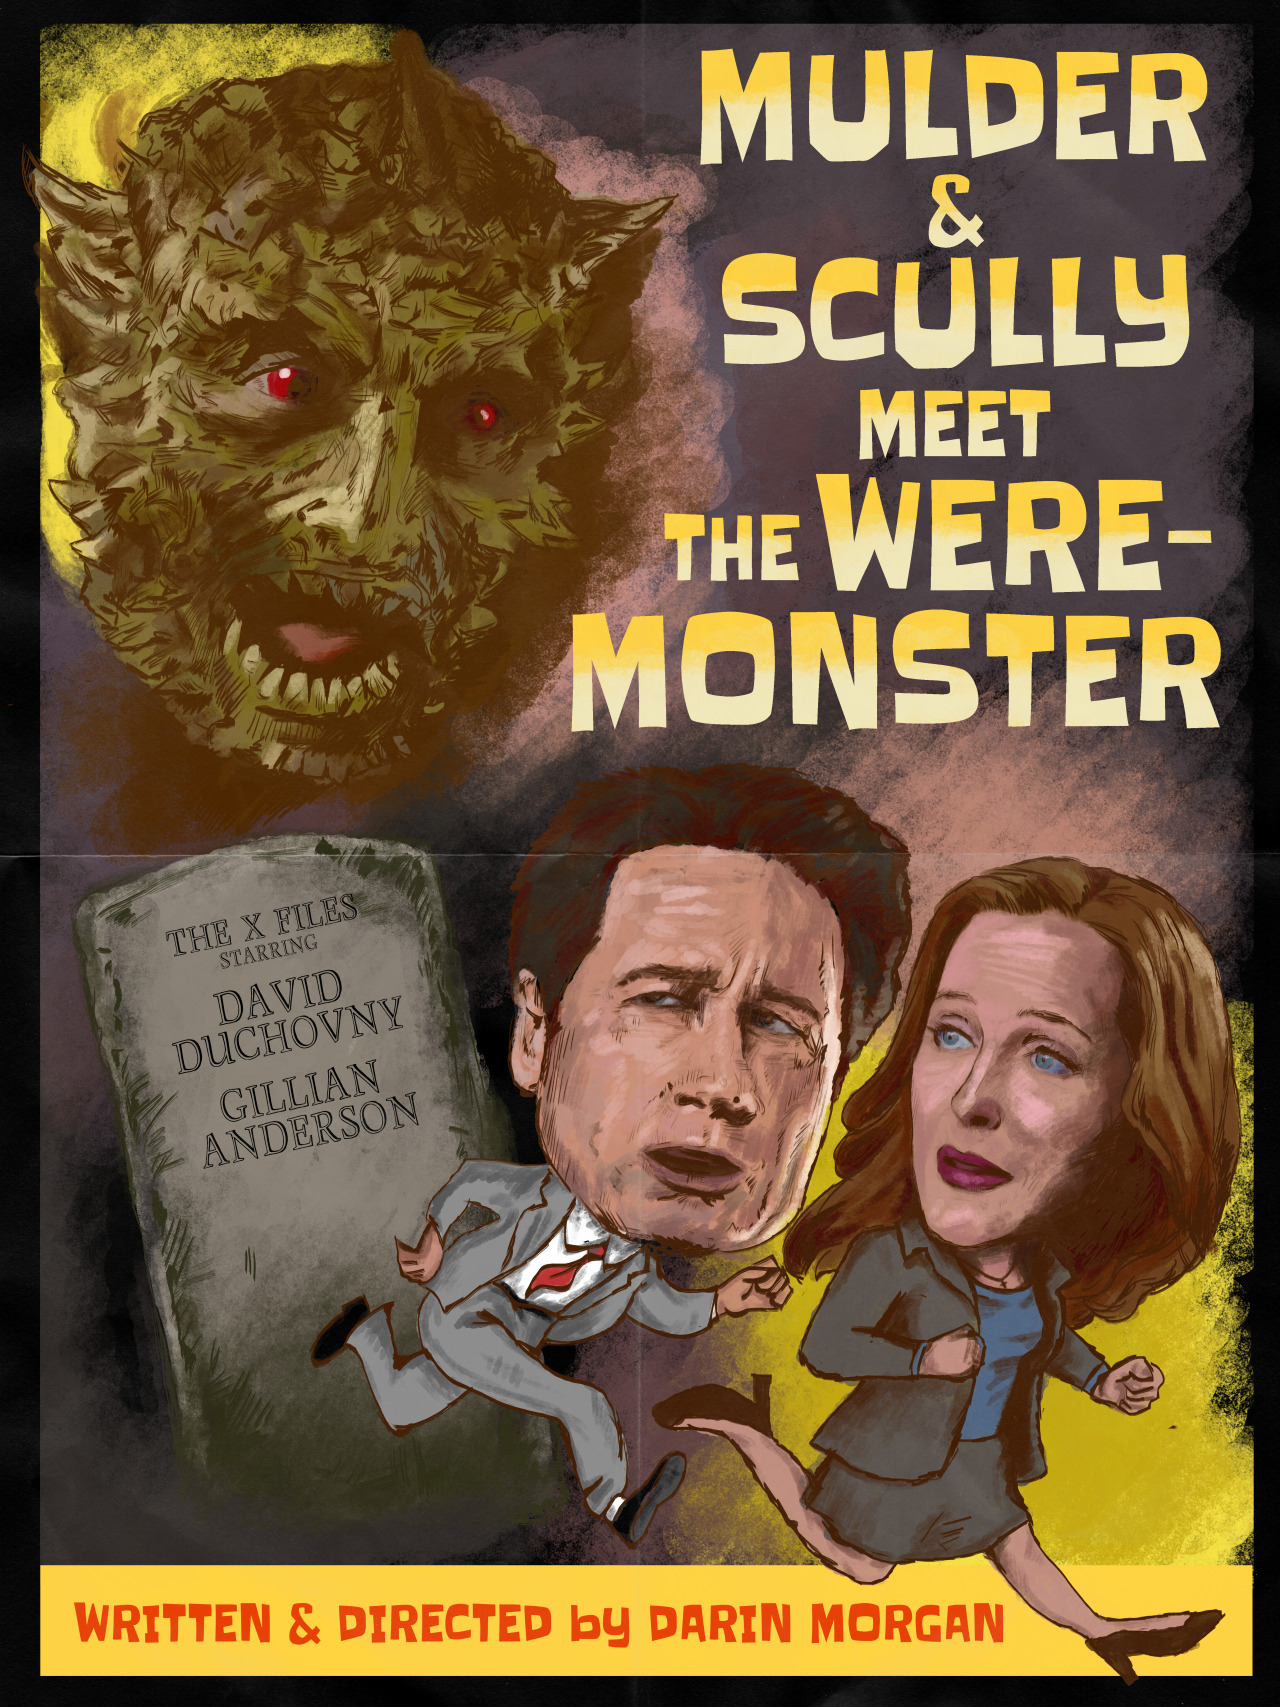 Mulder & Scully Meet The Were-Monster - Episode 204. Abbott and Costello or the FBI’s spookiest duo? You can also find my poster for last night’s episode on the official X-Files FB and Twitter.